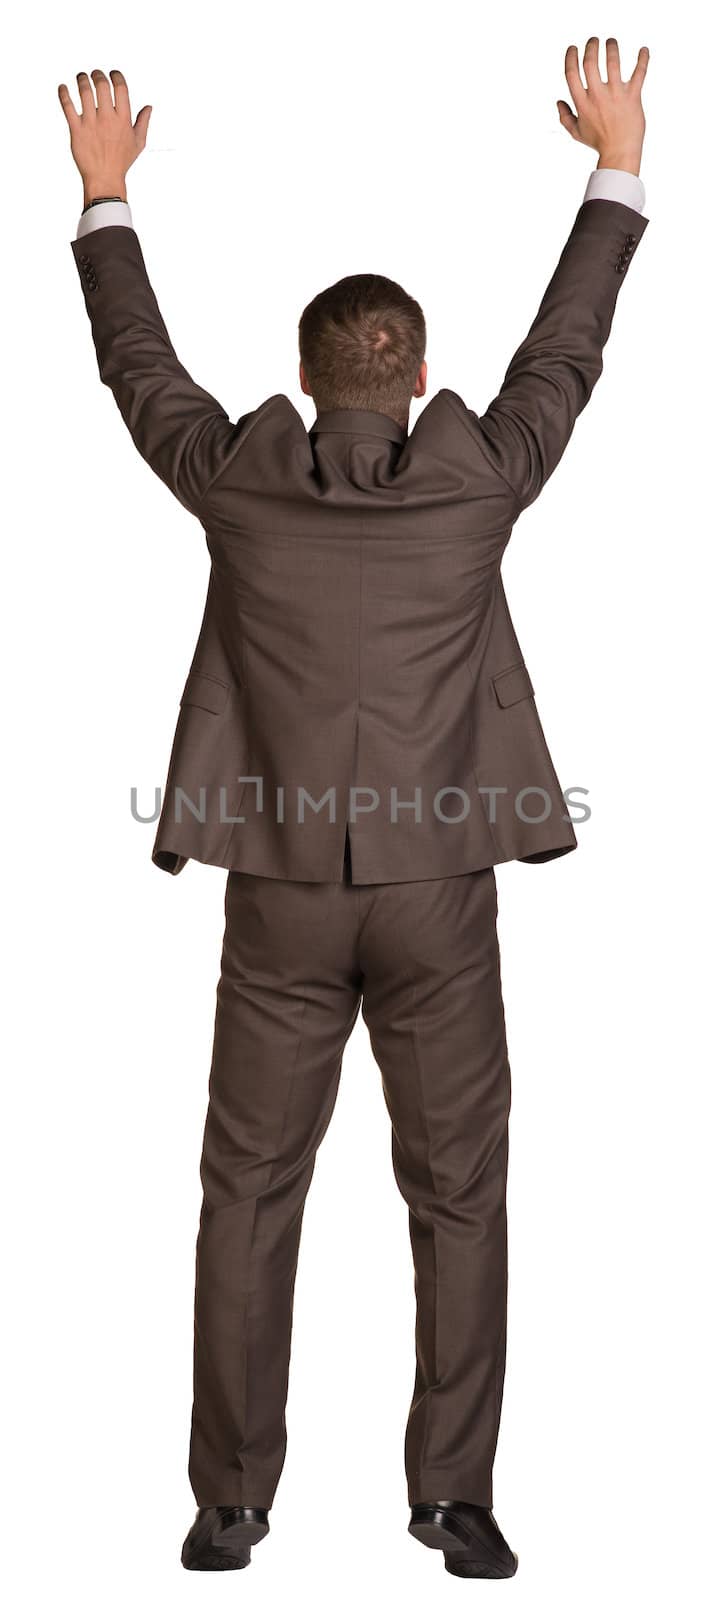 Businessman holding hands up in front of him. Rear view. Isolated on white background.